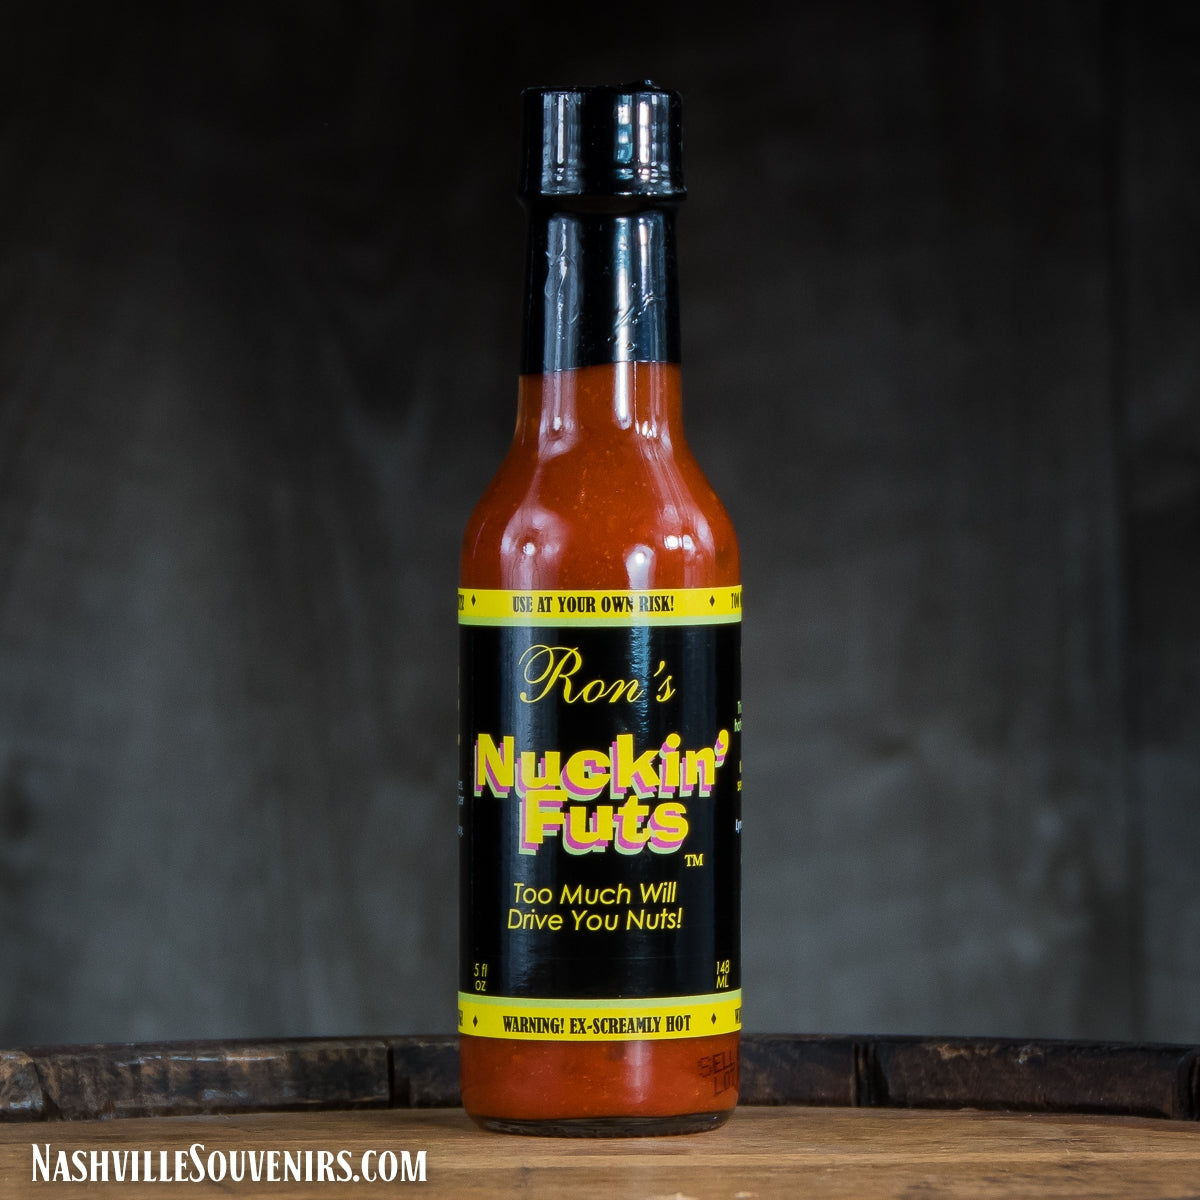 Nuckin Futs Hot Sauce - Extremely Hot. Use at your own risk, too much will drive you nuts! FREE SHIPPING on all US orders over $75!